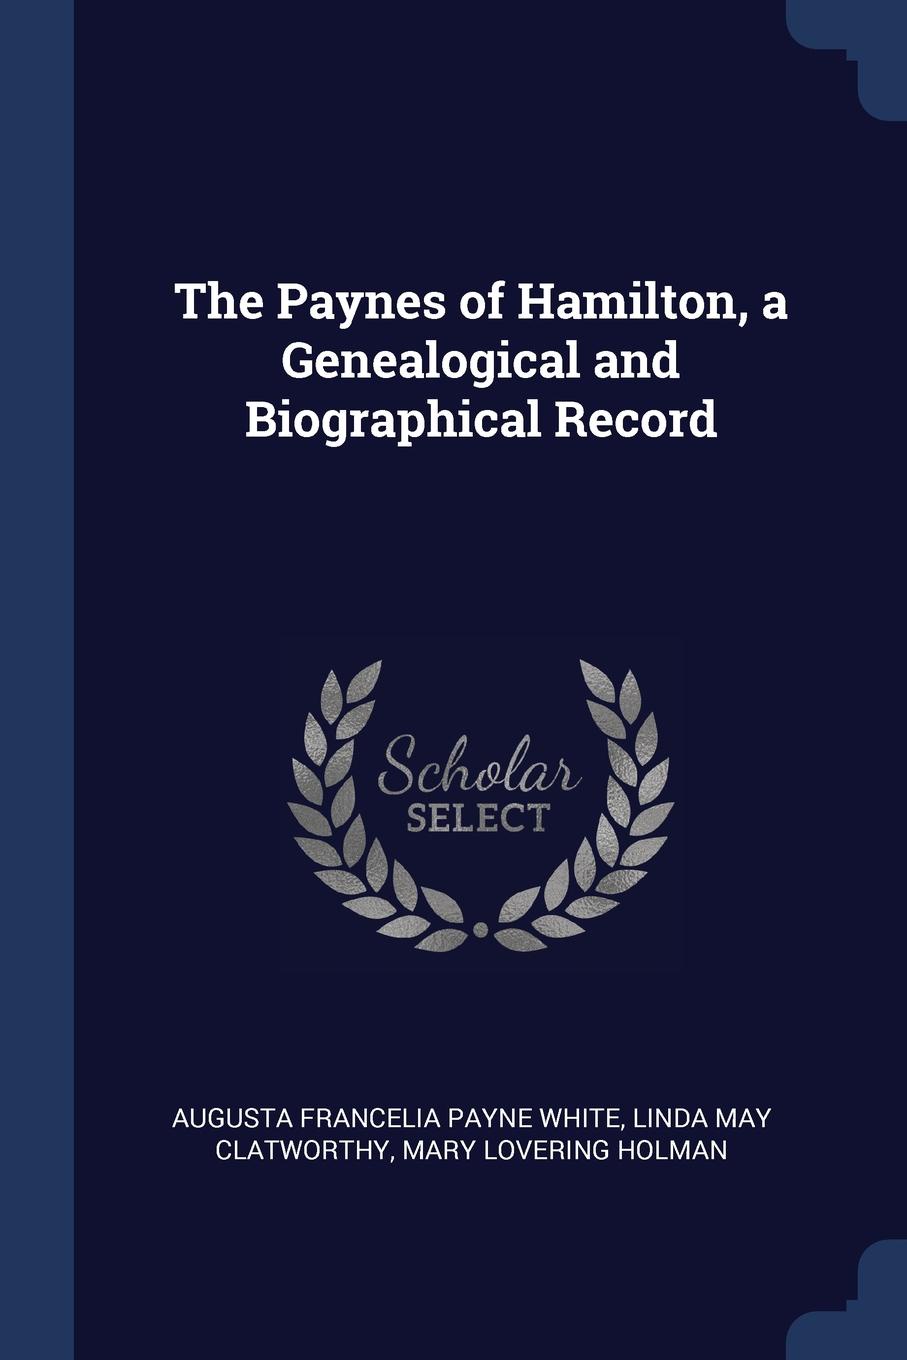 The Paynes of Hamilton, a Genealogical and Biographical Record